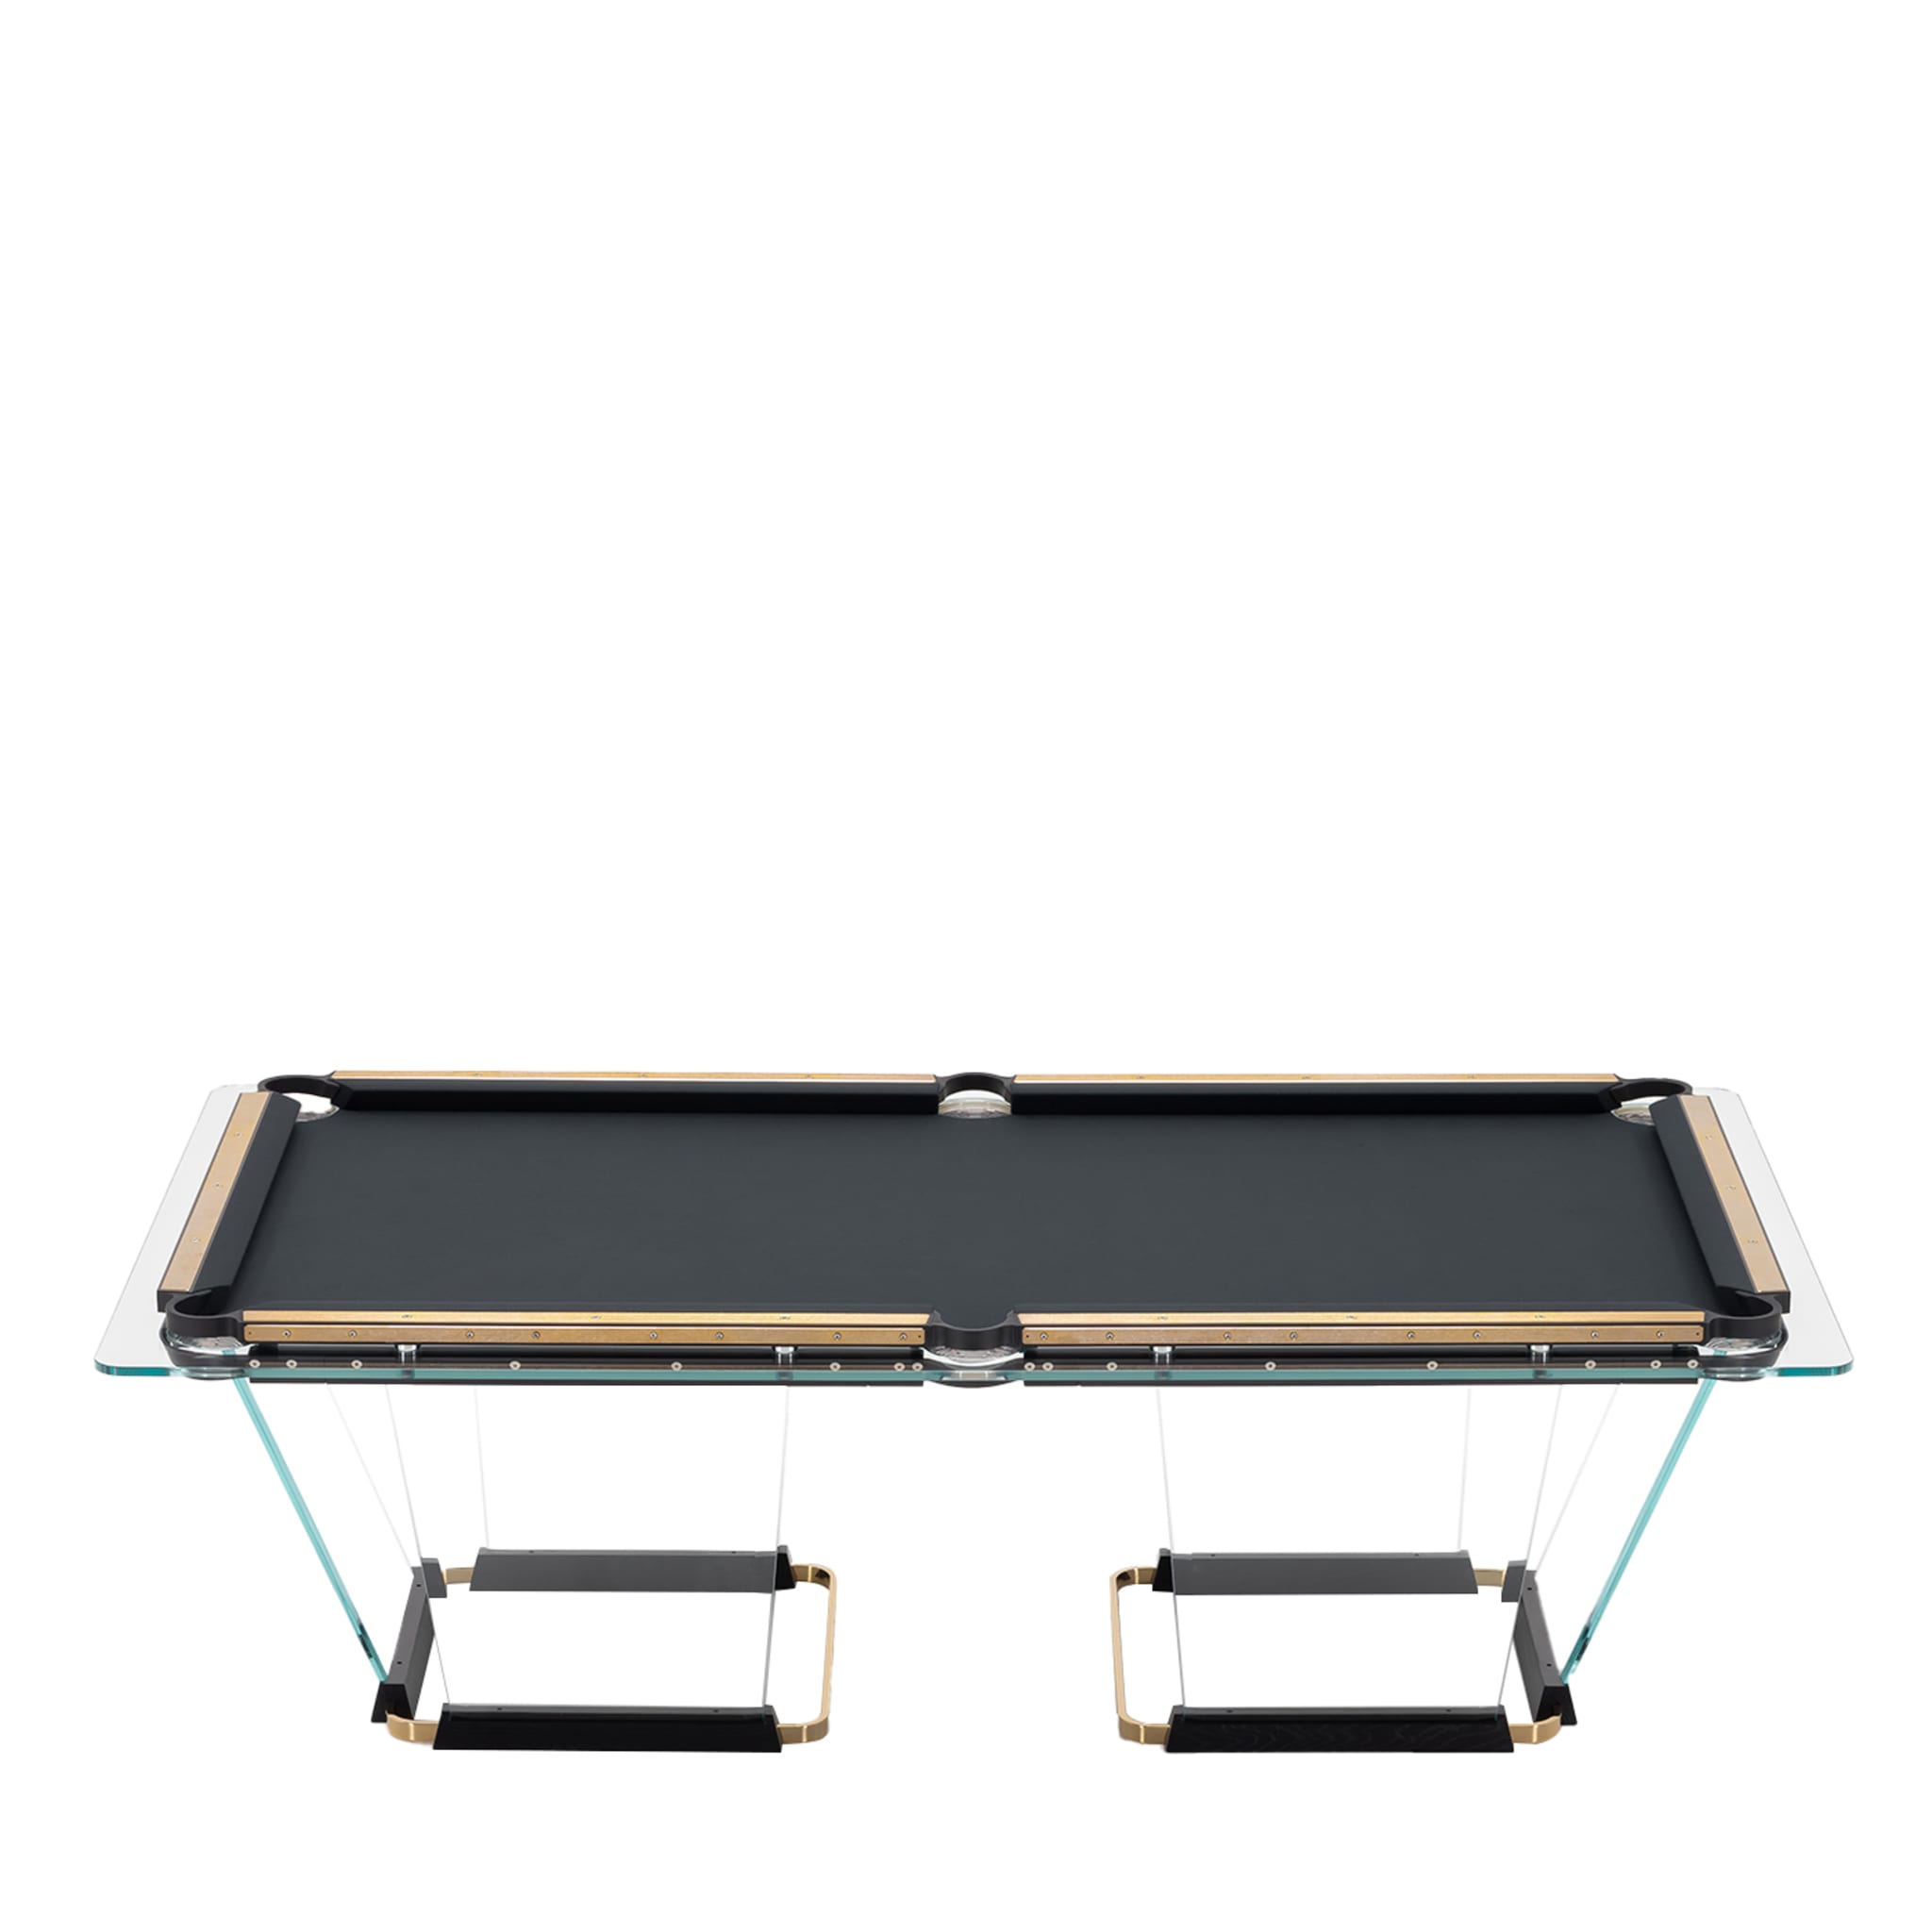 T1.3 Gold 24K Limited edition Pool Table - 8ft - Main view